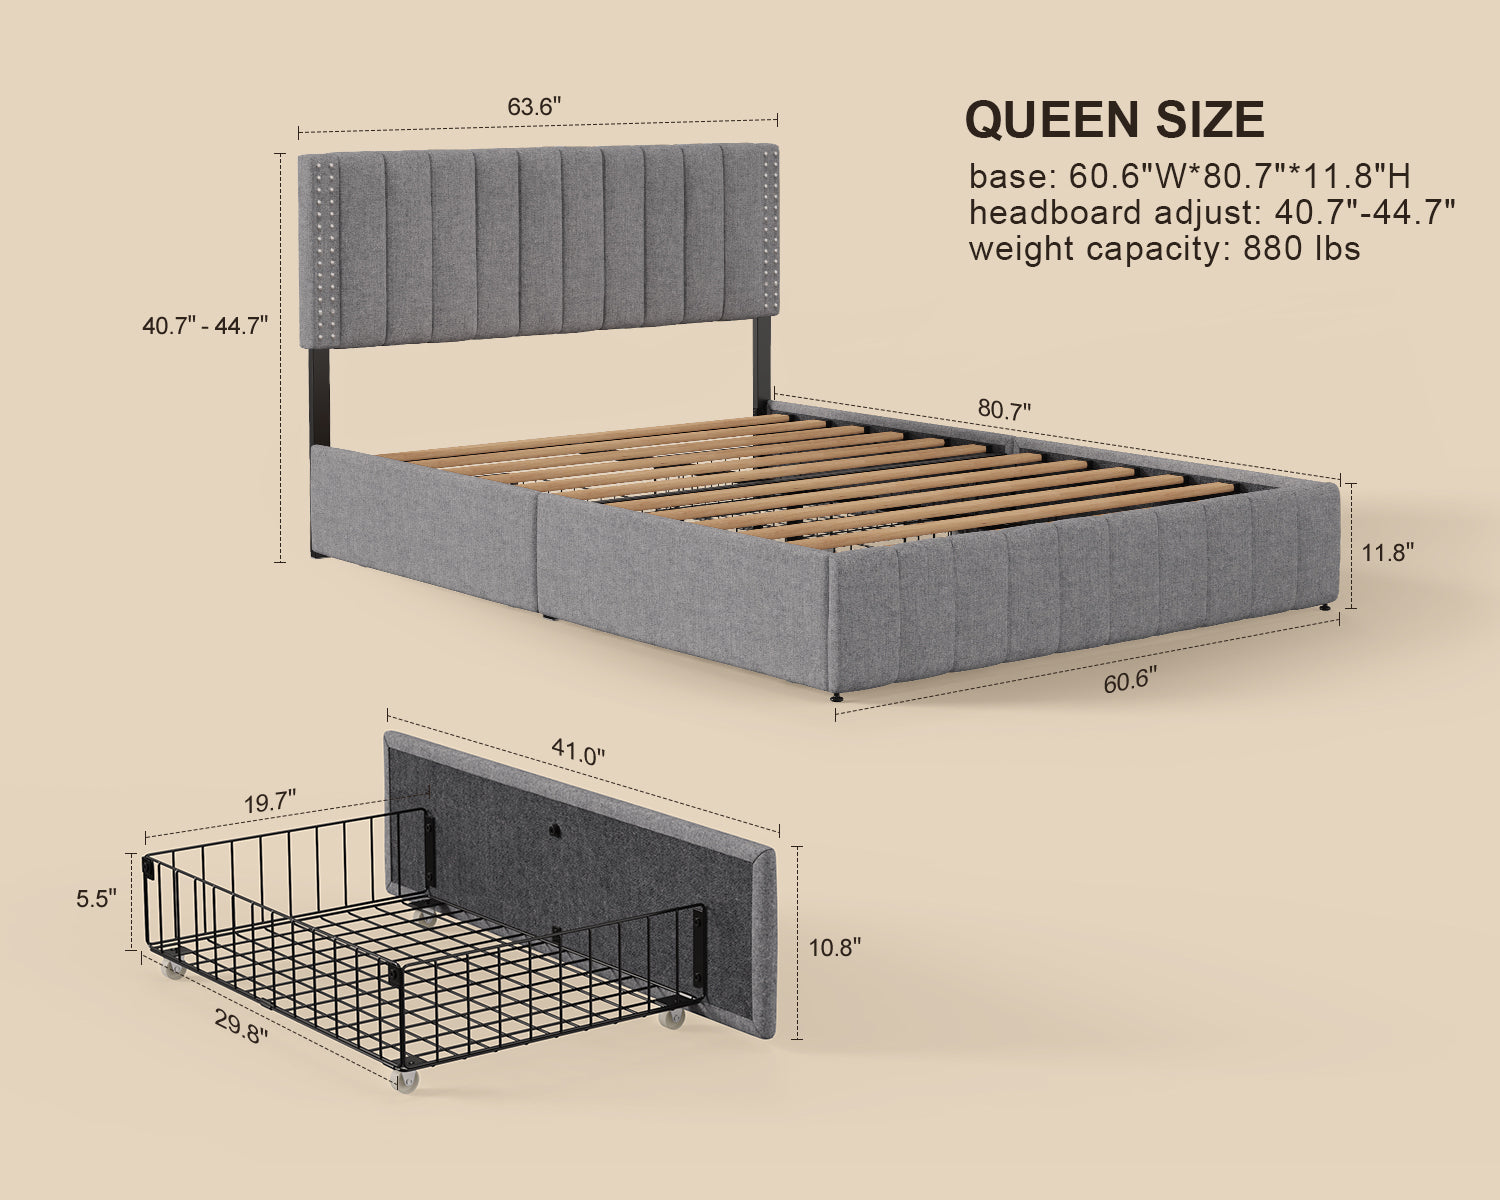 Gizoon BF03 Bed Frame with 4 Storage Drawers and Adjustable Headboard